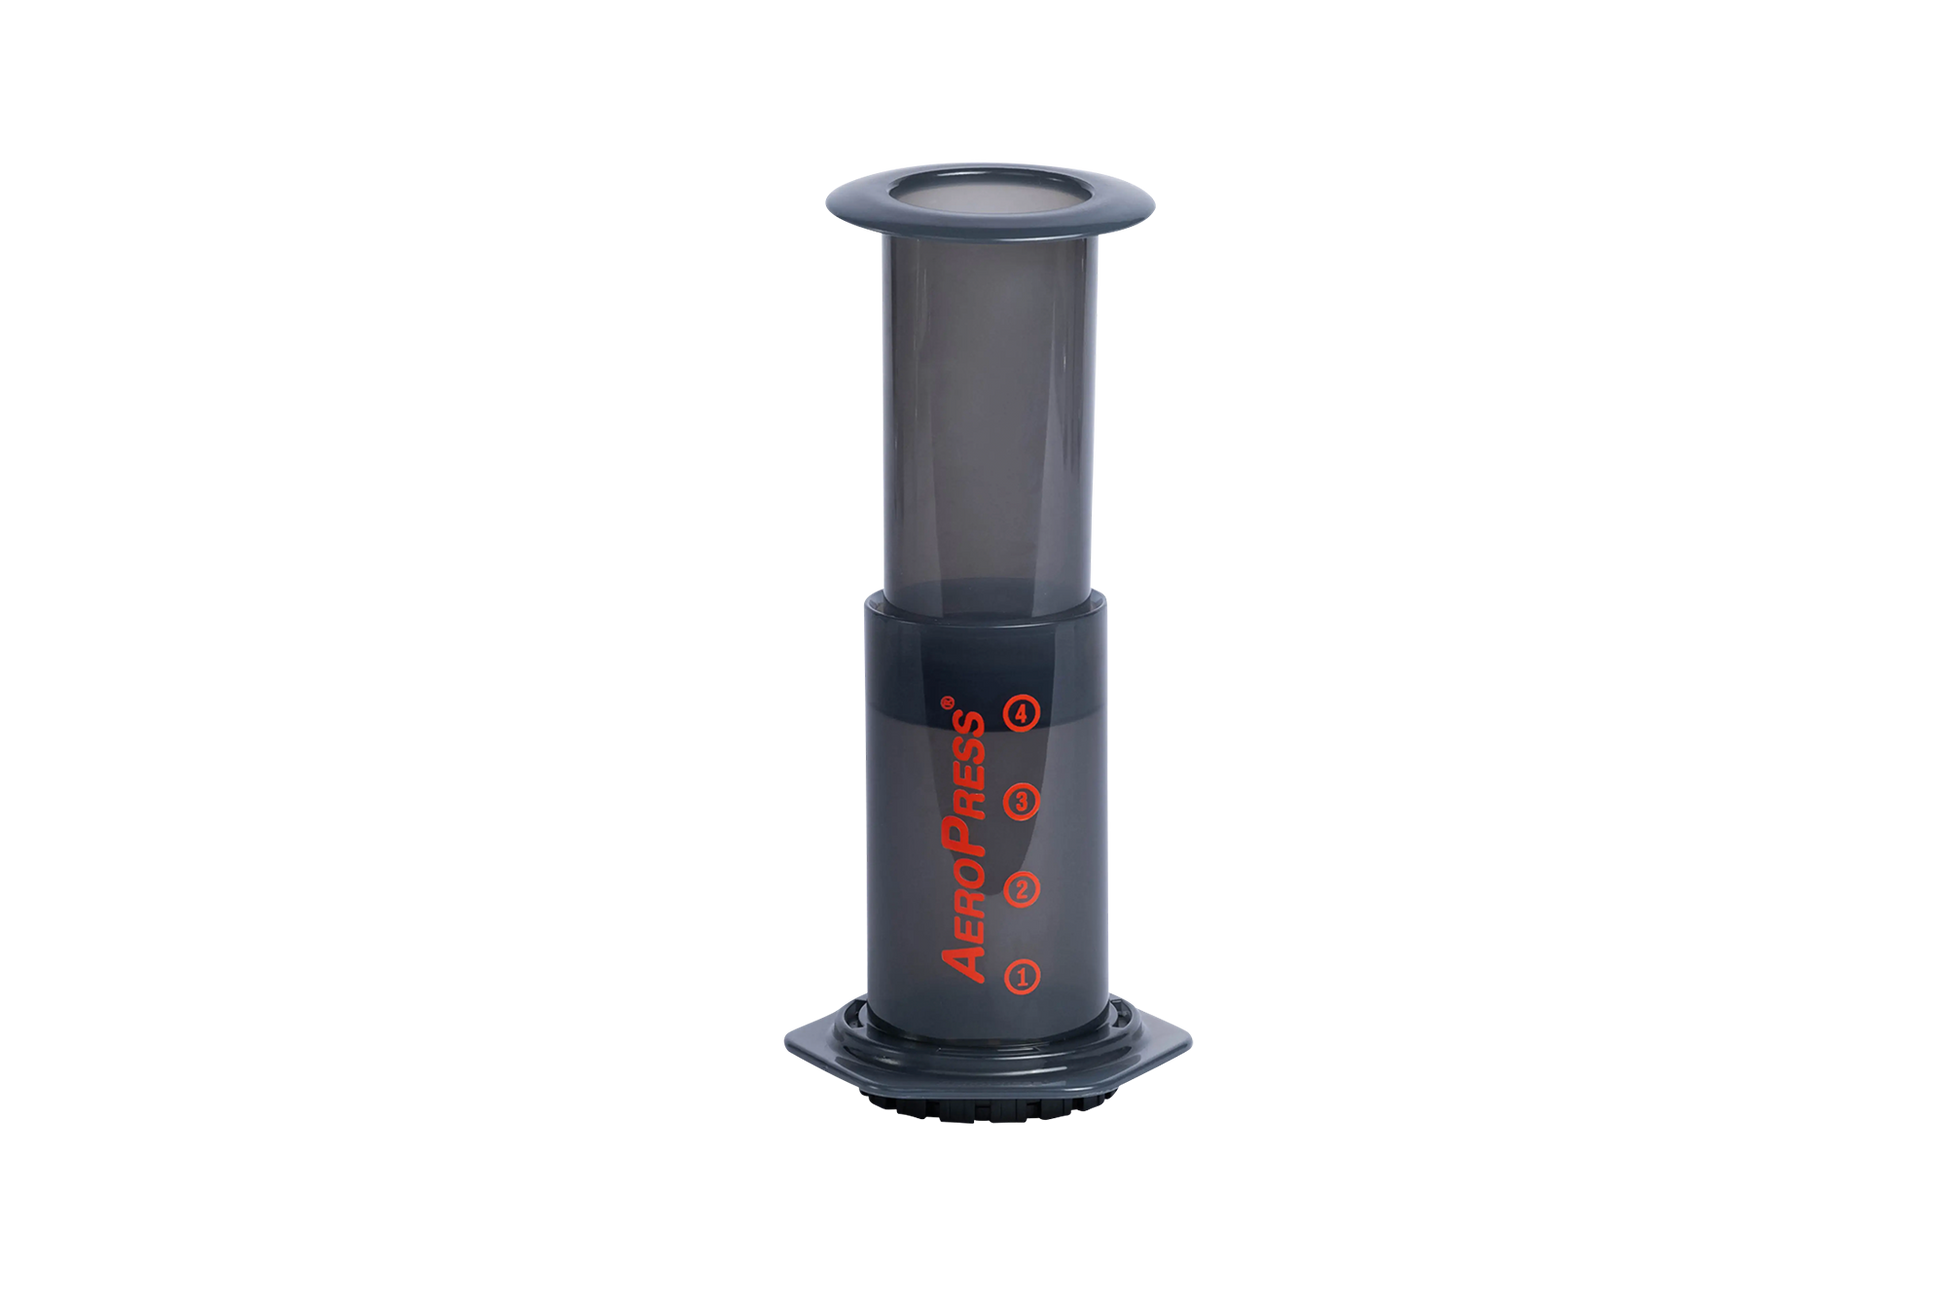 There's a reason the AeroPress is one of our favourite brewers; simple to use, easy to clean and travel-friendly, it delivers consistently delicious coffee.